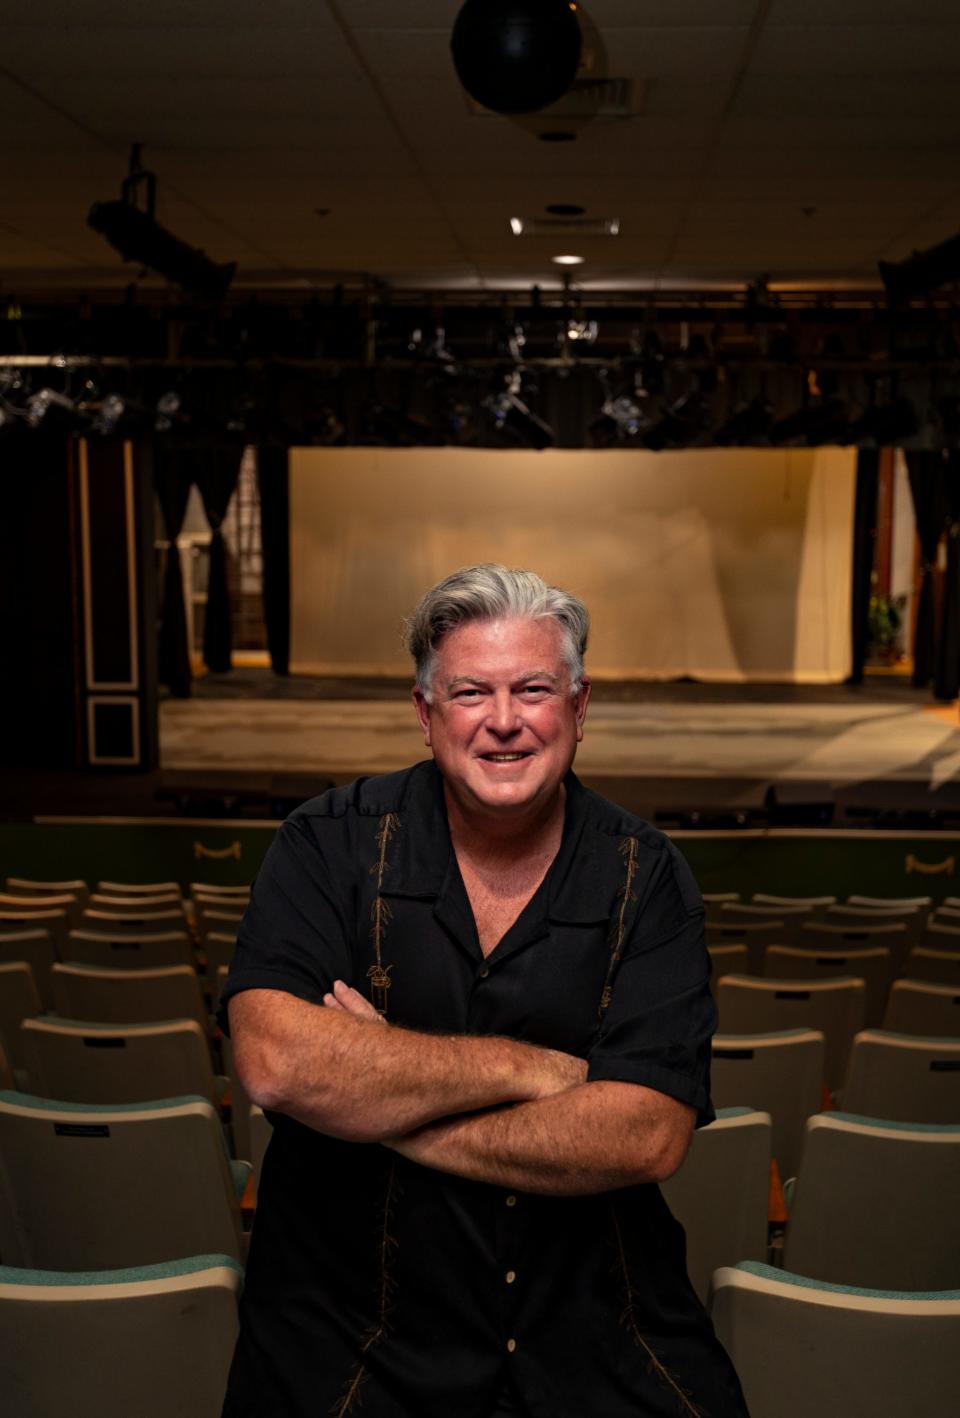 Mark Fleming is the new Executive Director of the Cultural Park Theatre in Cape Coral.